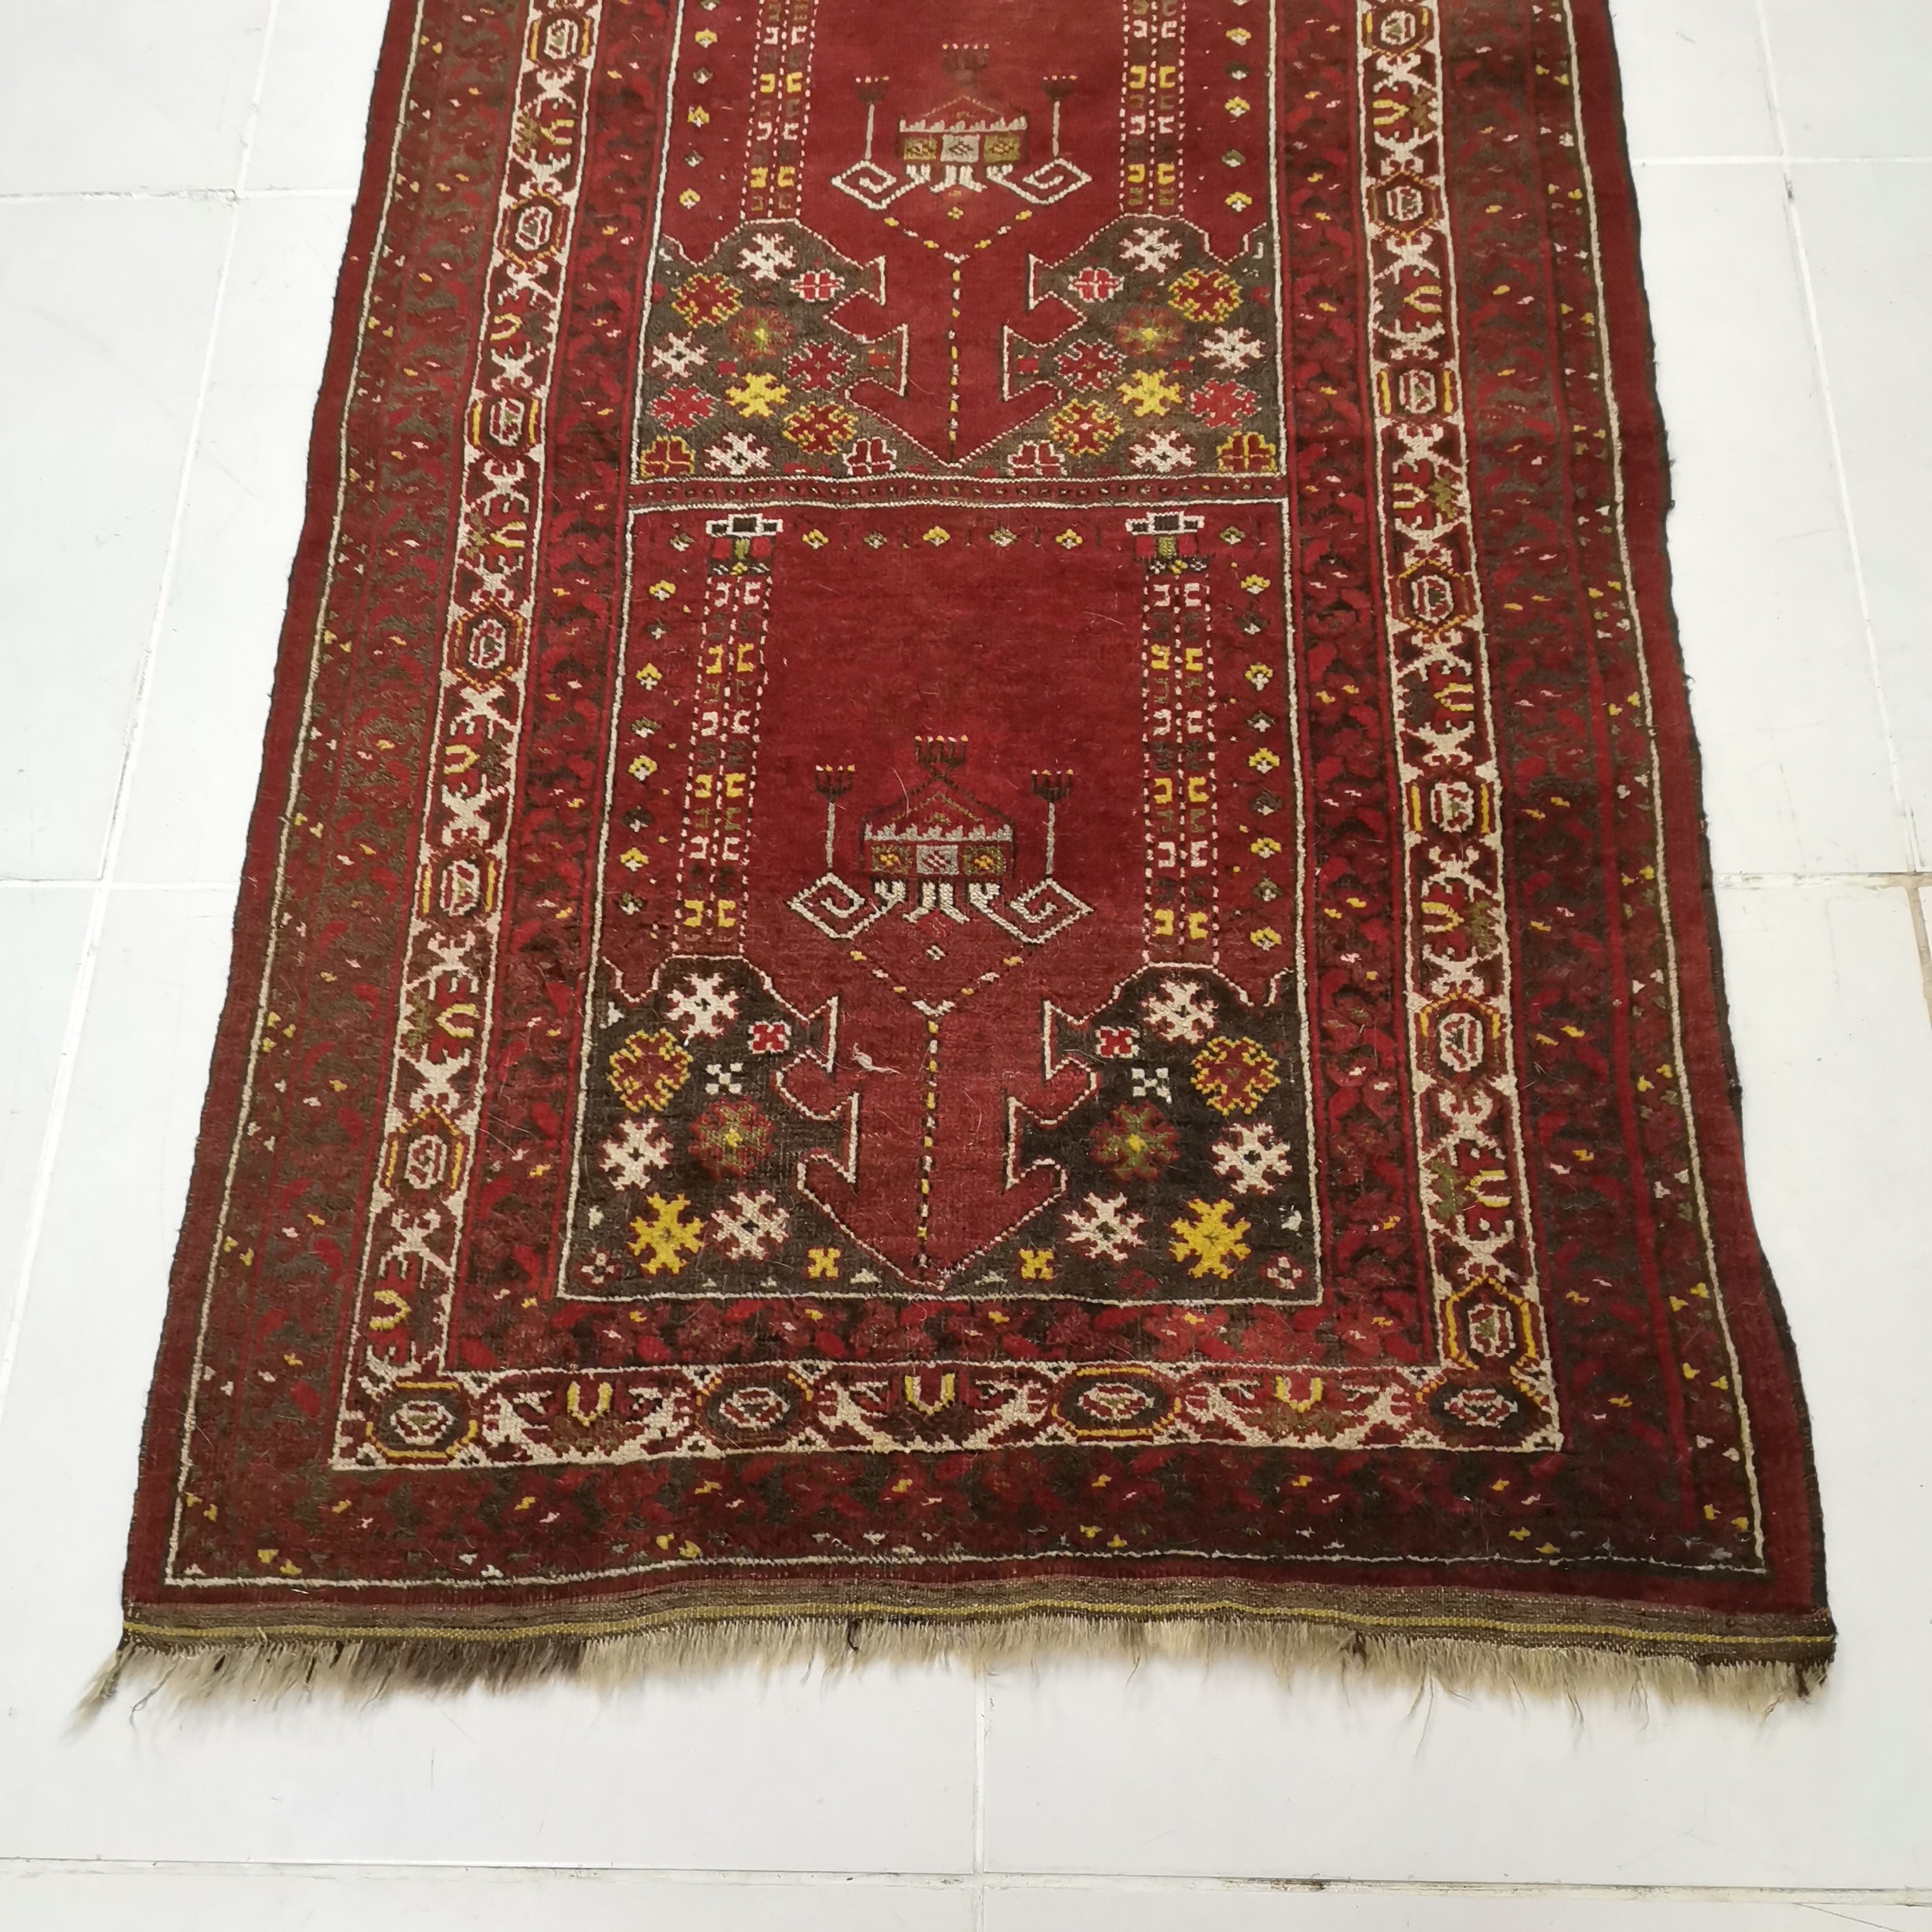 Red ground rug with all over decoration within multiple borders ~ 102cm x 170cm - Image 2 of 3